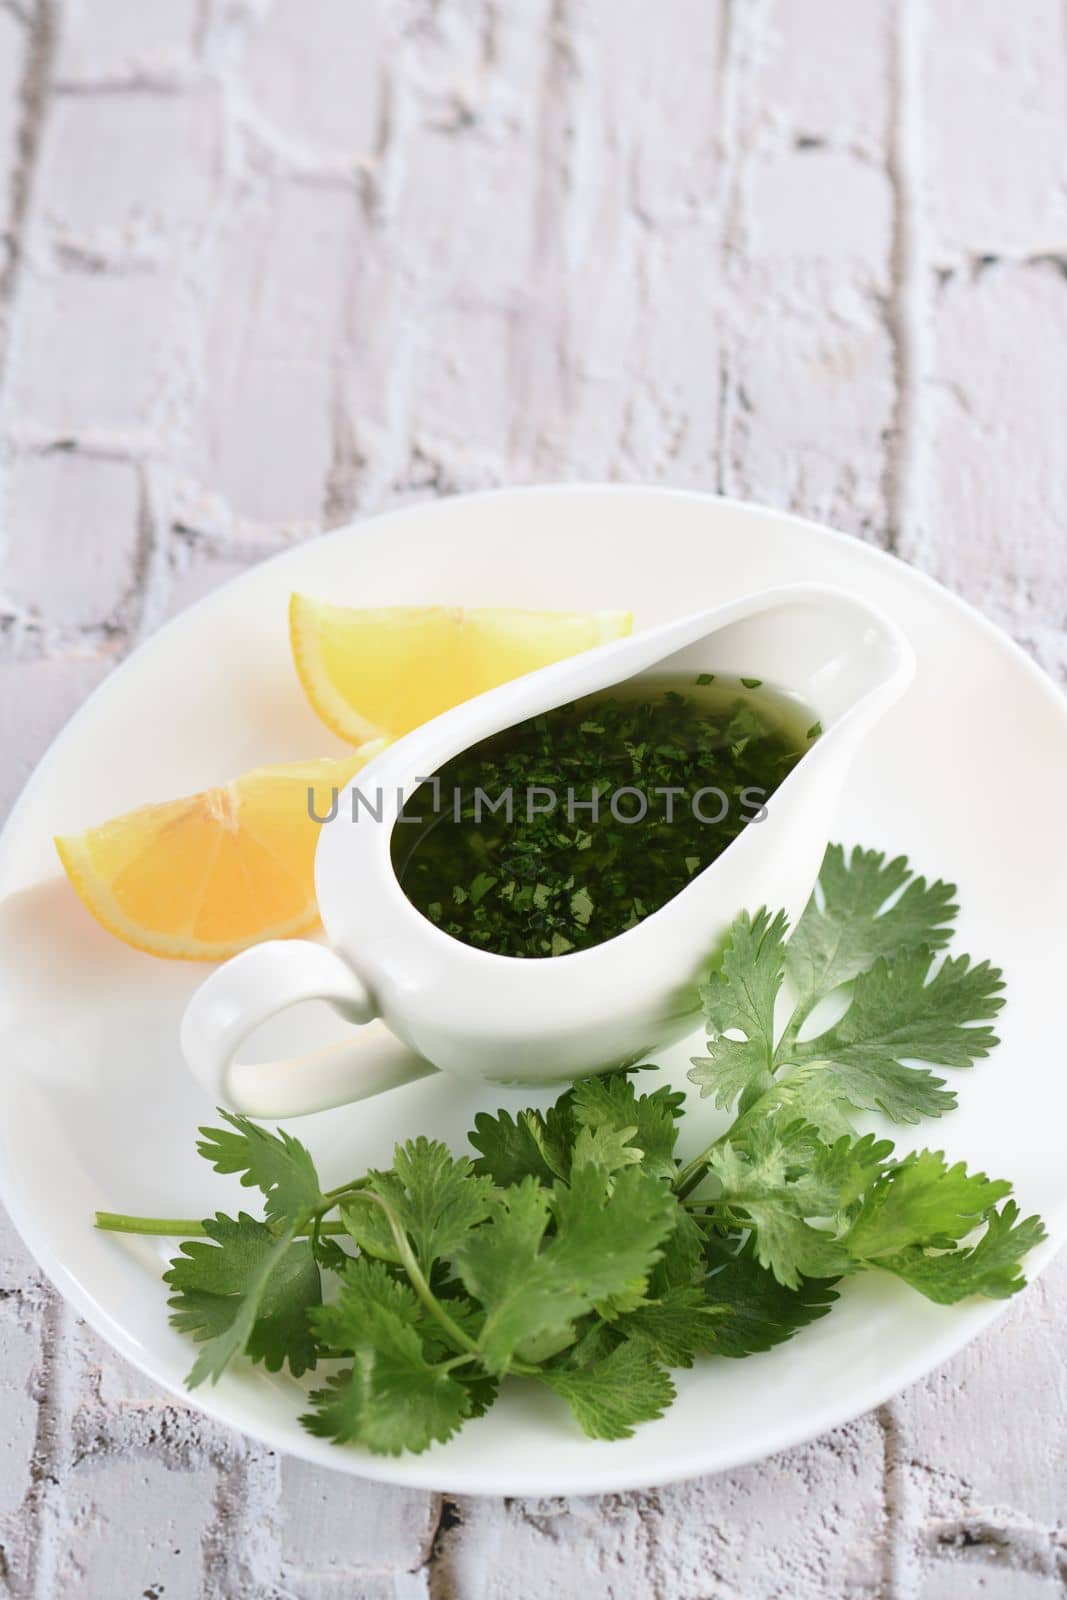 Green sauce, seasoning for salad by Apolonia